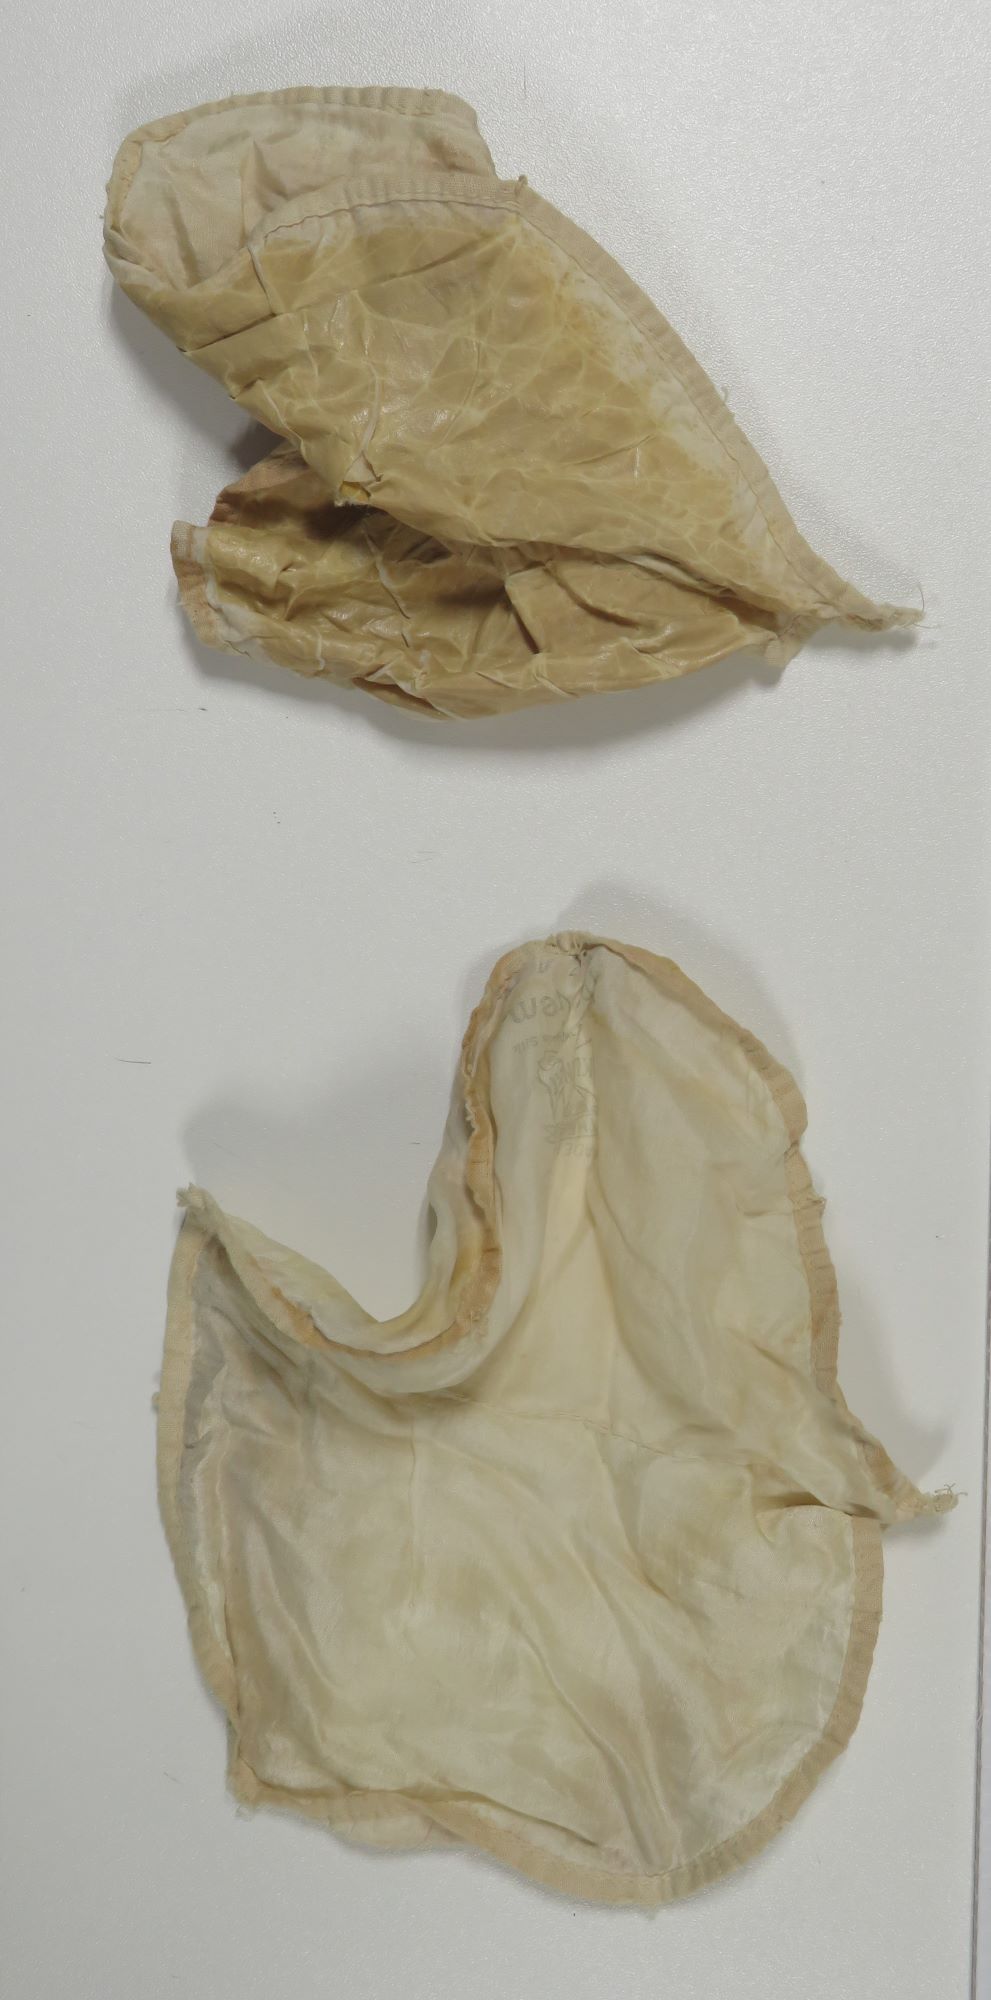 Underarm pads removed from costume - Janie Lightfoot.jpg